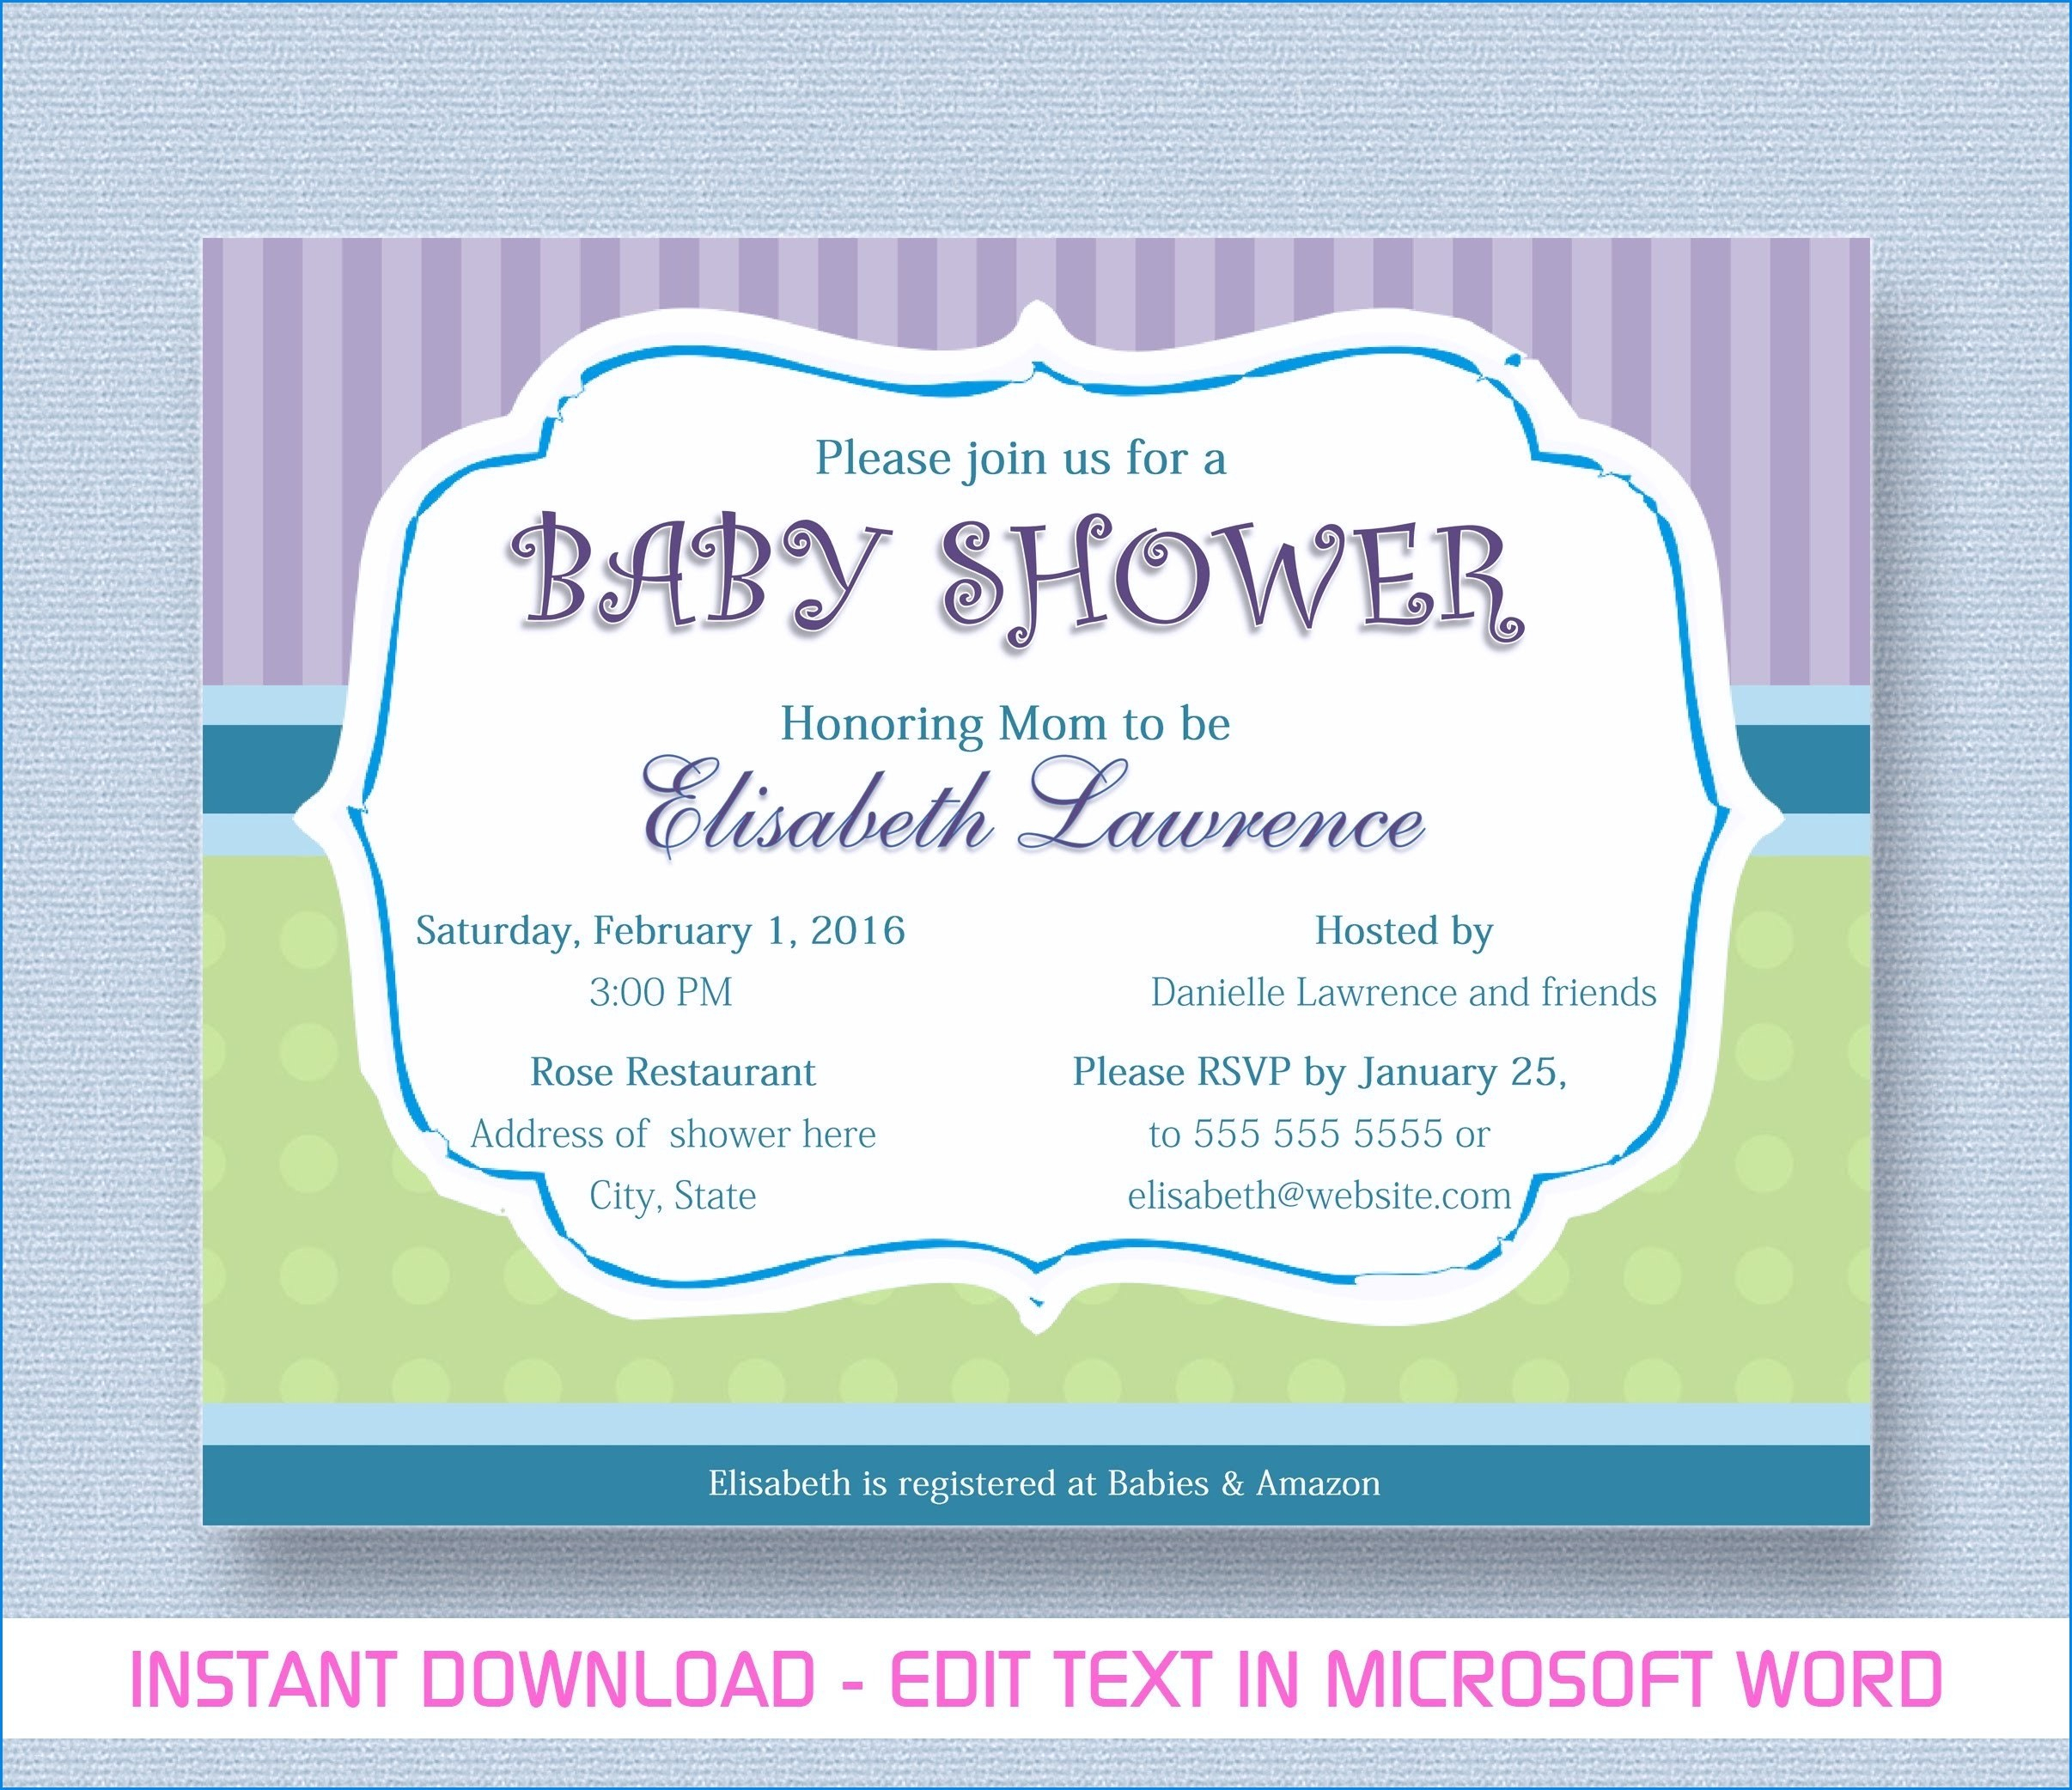 Baby Shower Invitation Template Microsoft Word Five Ideas With Regard To Free Baby Shower Invitation Templates Microsoft Word